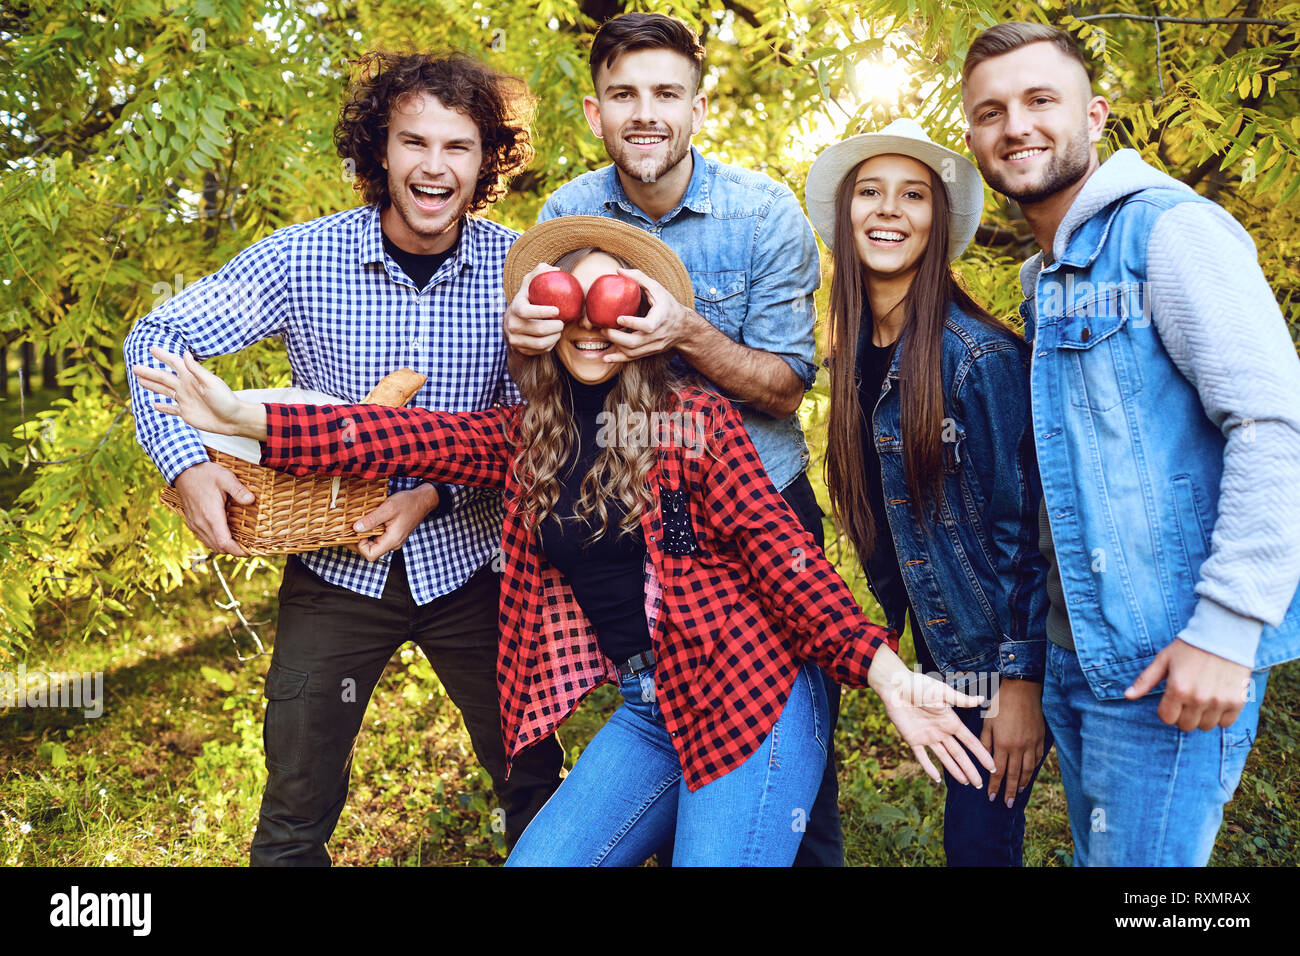 Cheerful friends are laughing in the park. Stock Photo